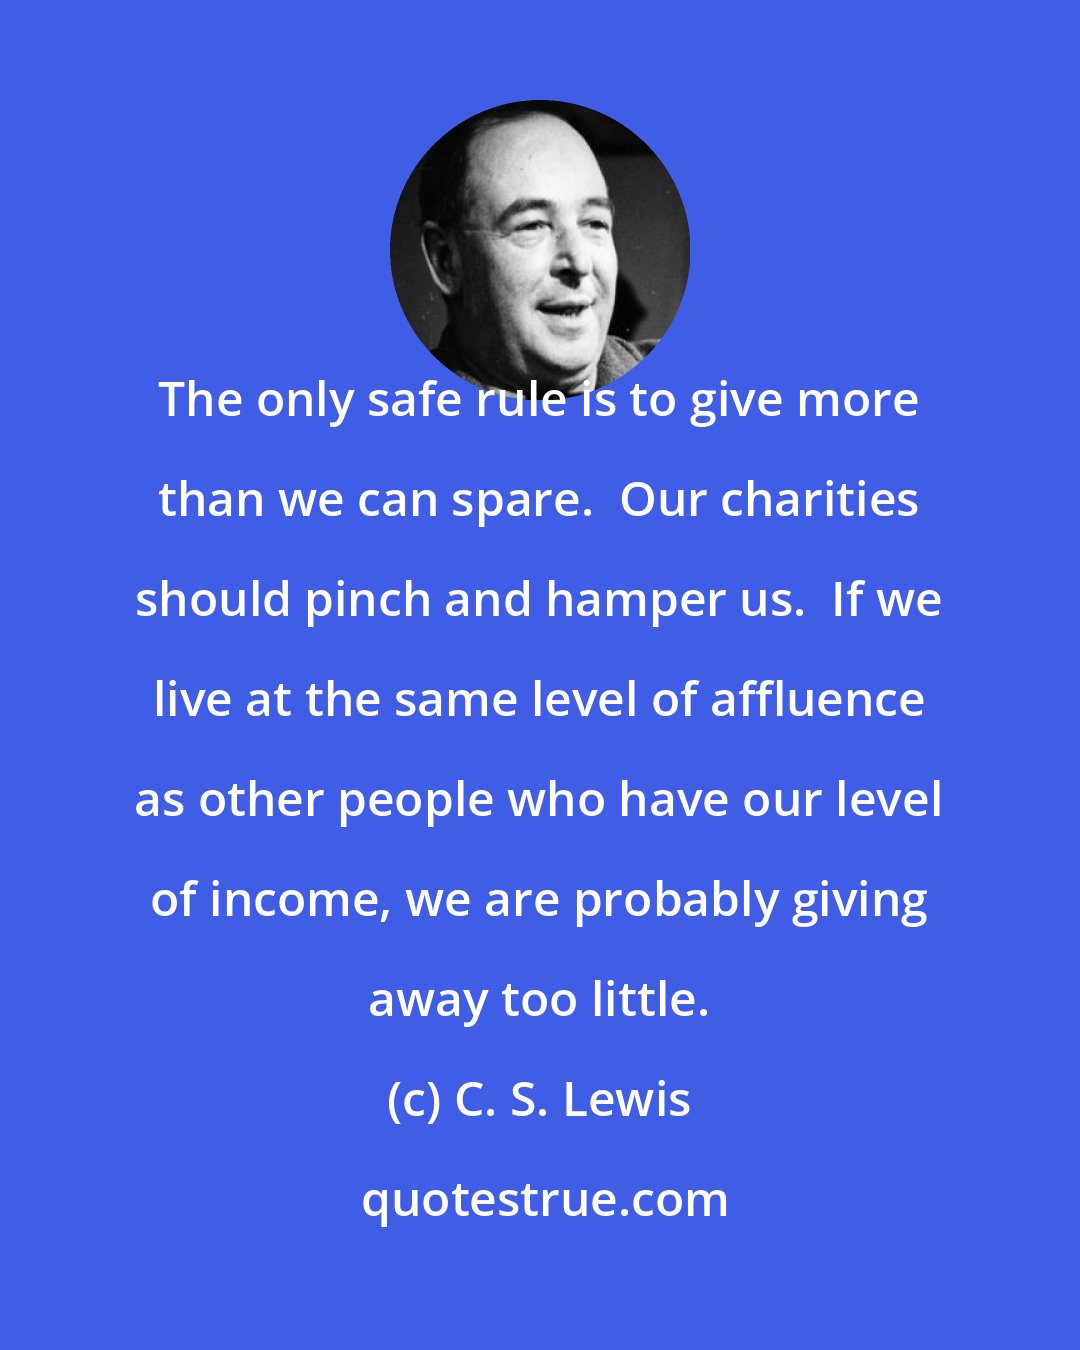 C. S. Lewis: The only safe rule is to give more than we can spare.  Our charities should pinch and hamper us.  If we live at the same level of affluence as other people who have our level of income, we are probably giving away too little.